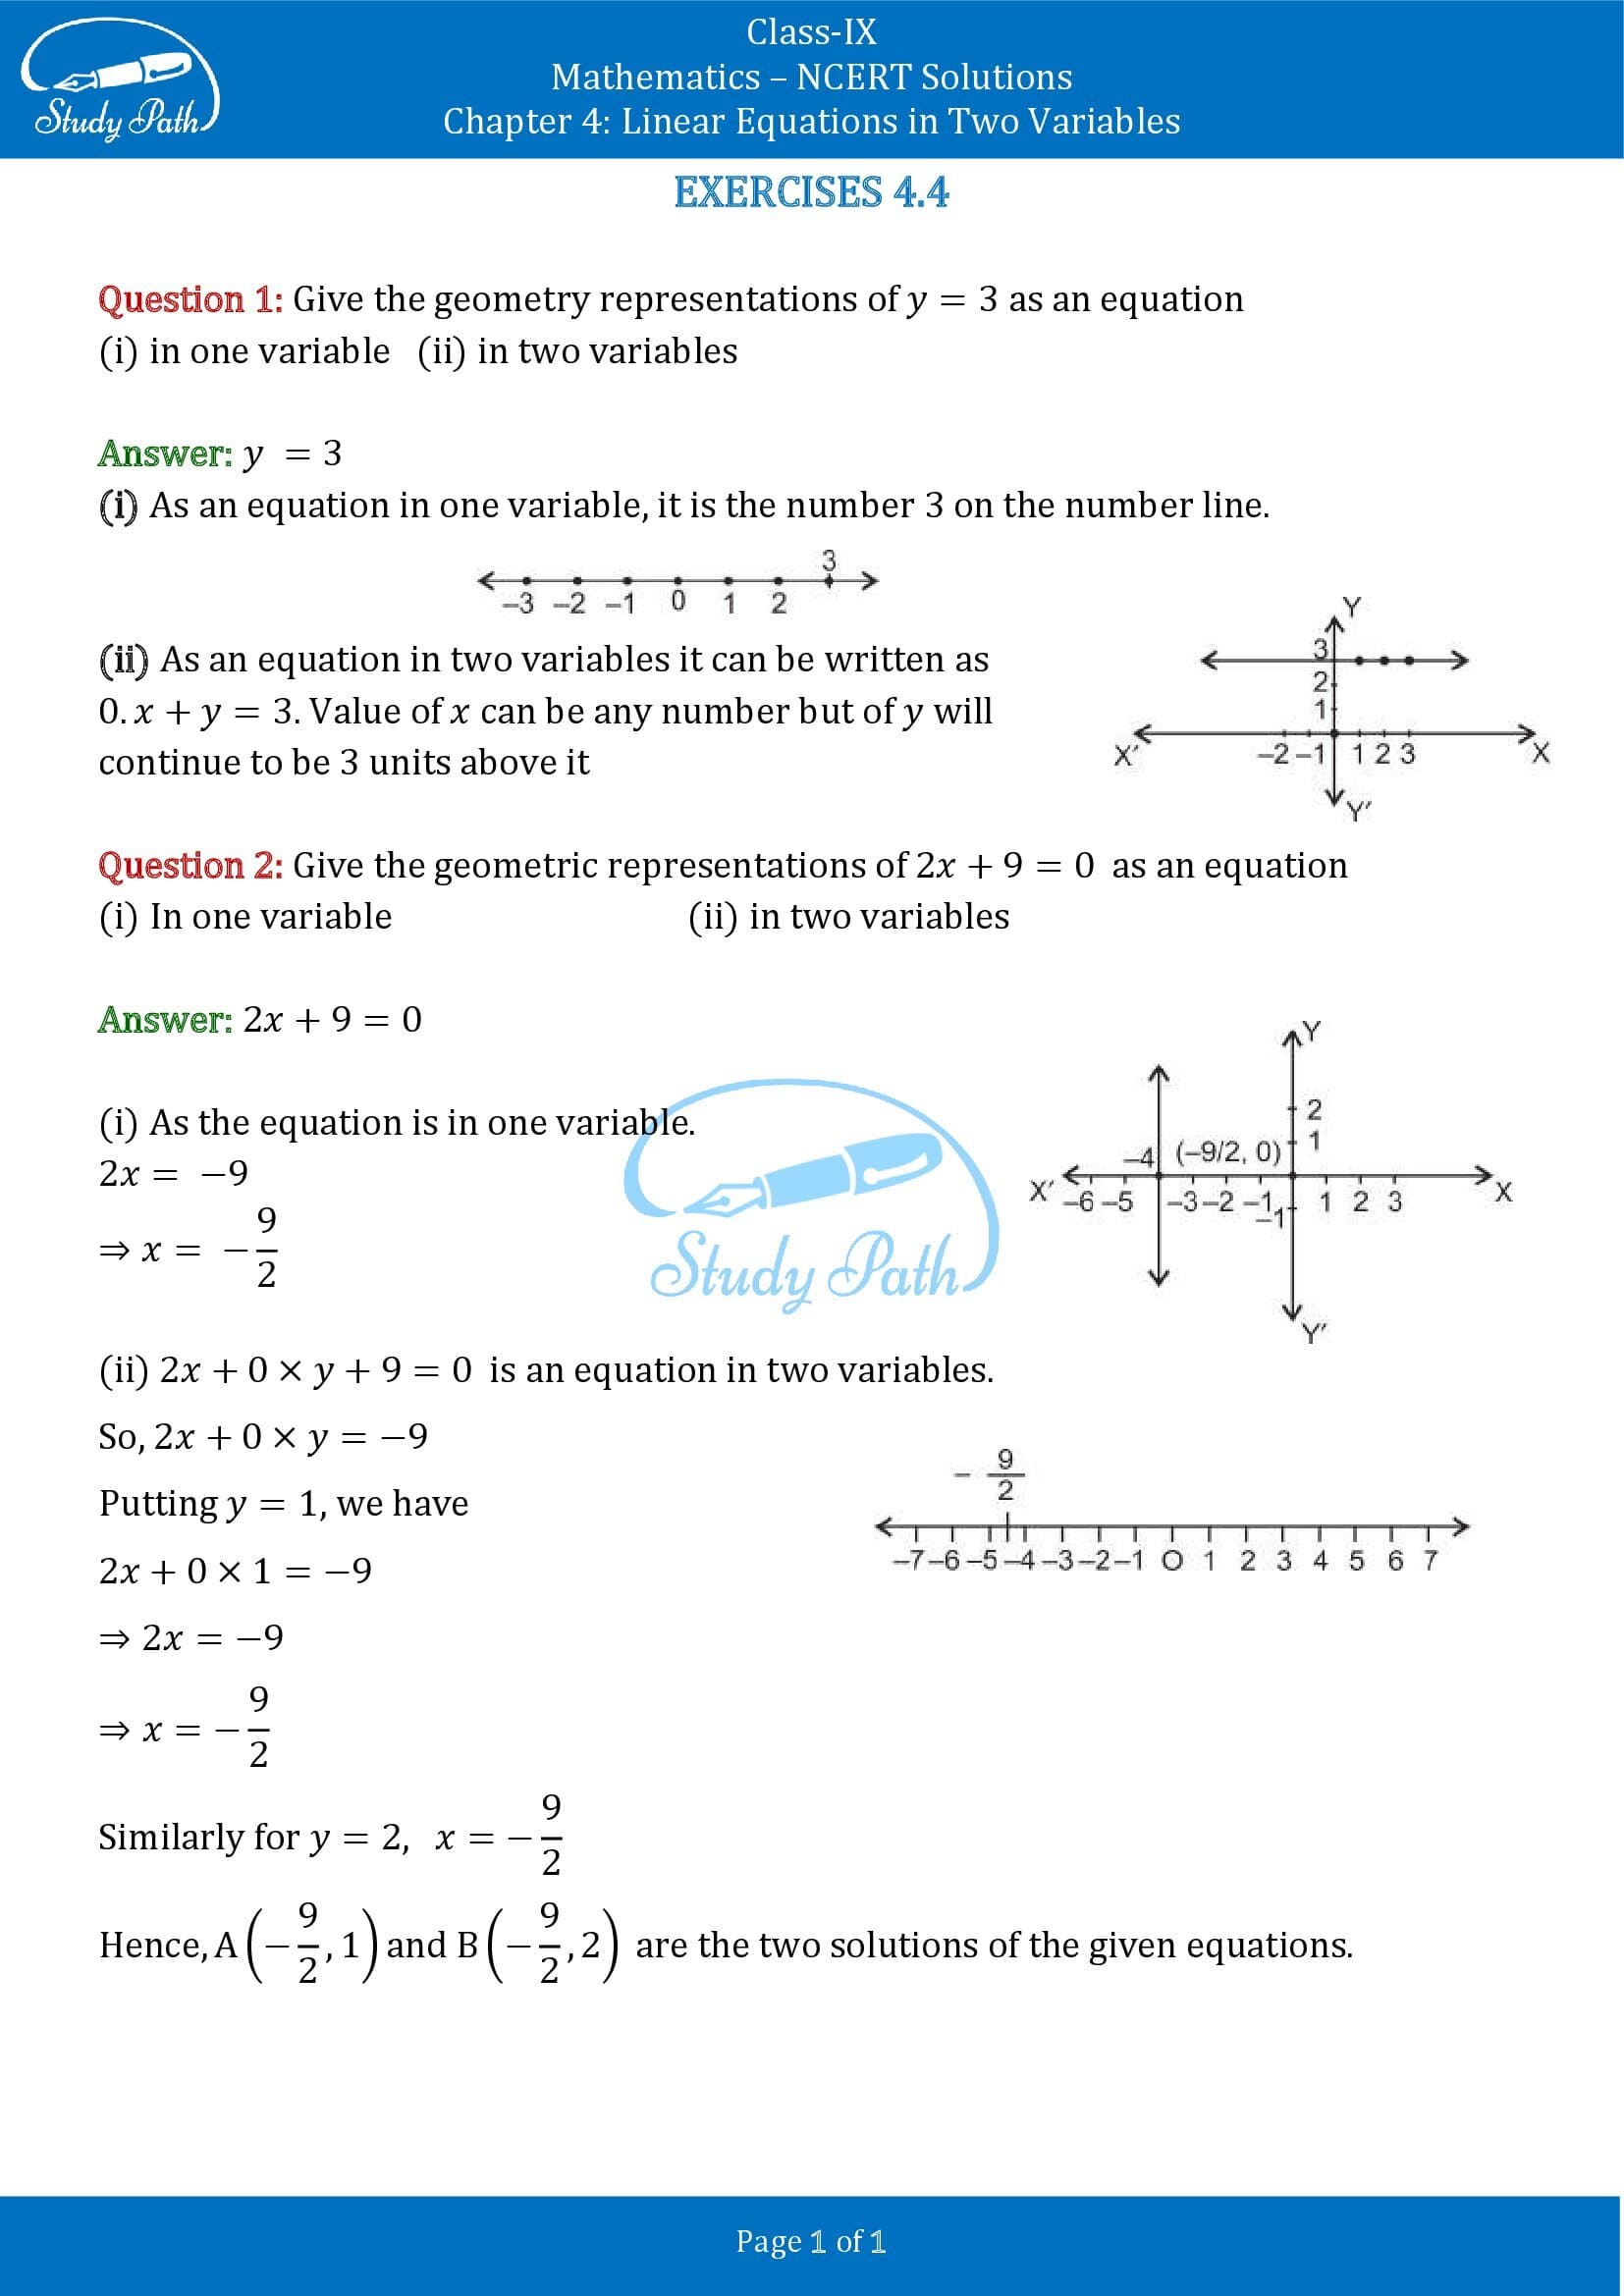 NCERT Solutions for Class 9 Maths Chapter 4 Linear Equations in Two Variables Exercise 4.4